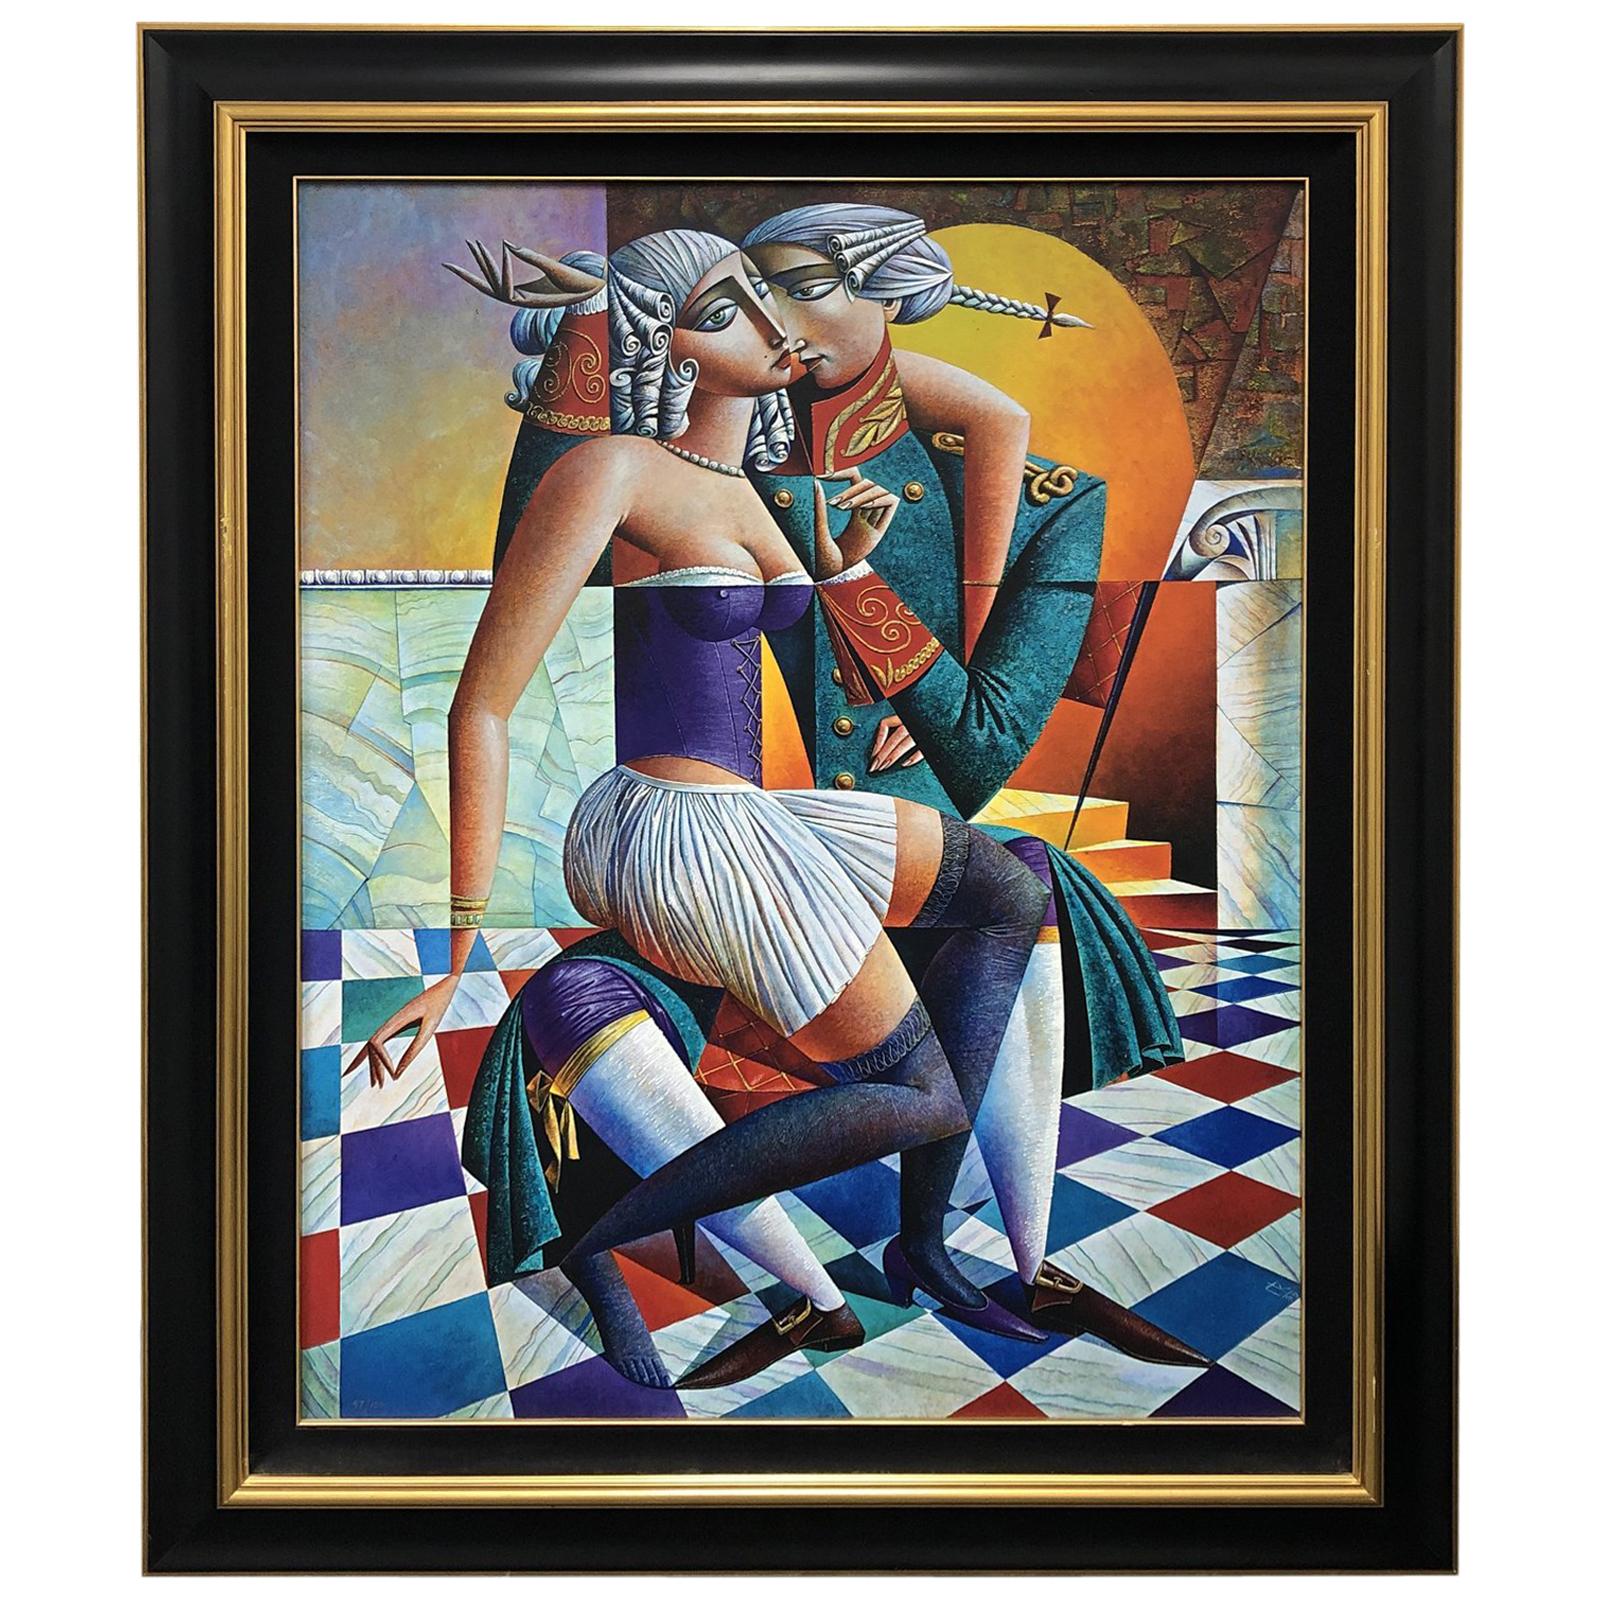 Limited Edition Georgy Kurasov Canvas Painting "Palace Intrigue" For Sale